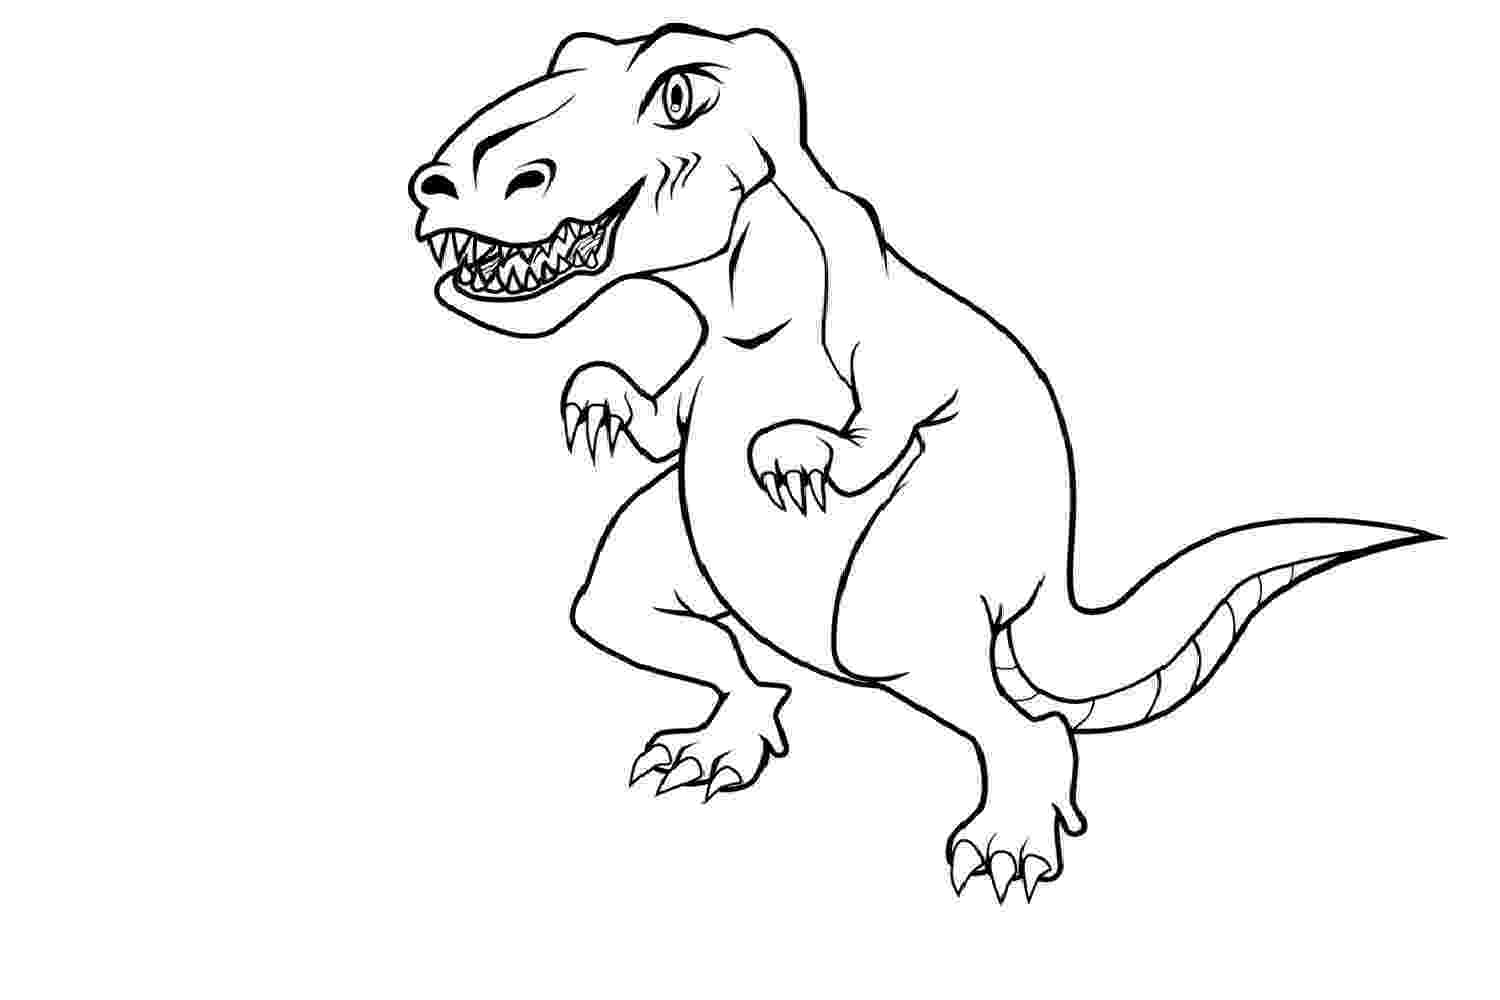 colouring pages dinosaurs printable dinosaurs coloring pages printable minister coloring colouring printable dinosaurs pages 